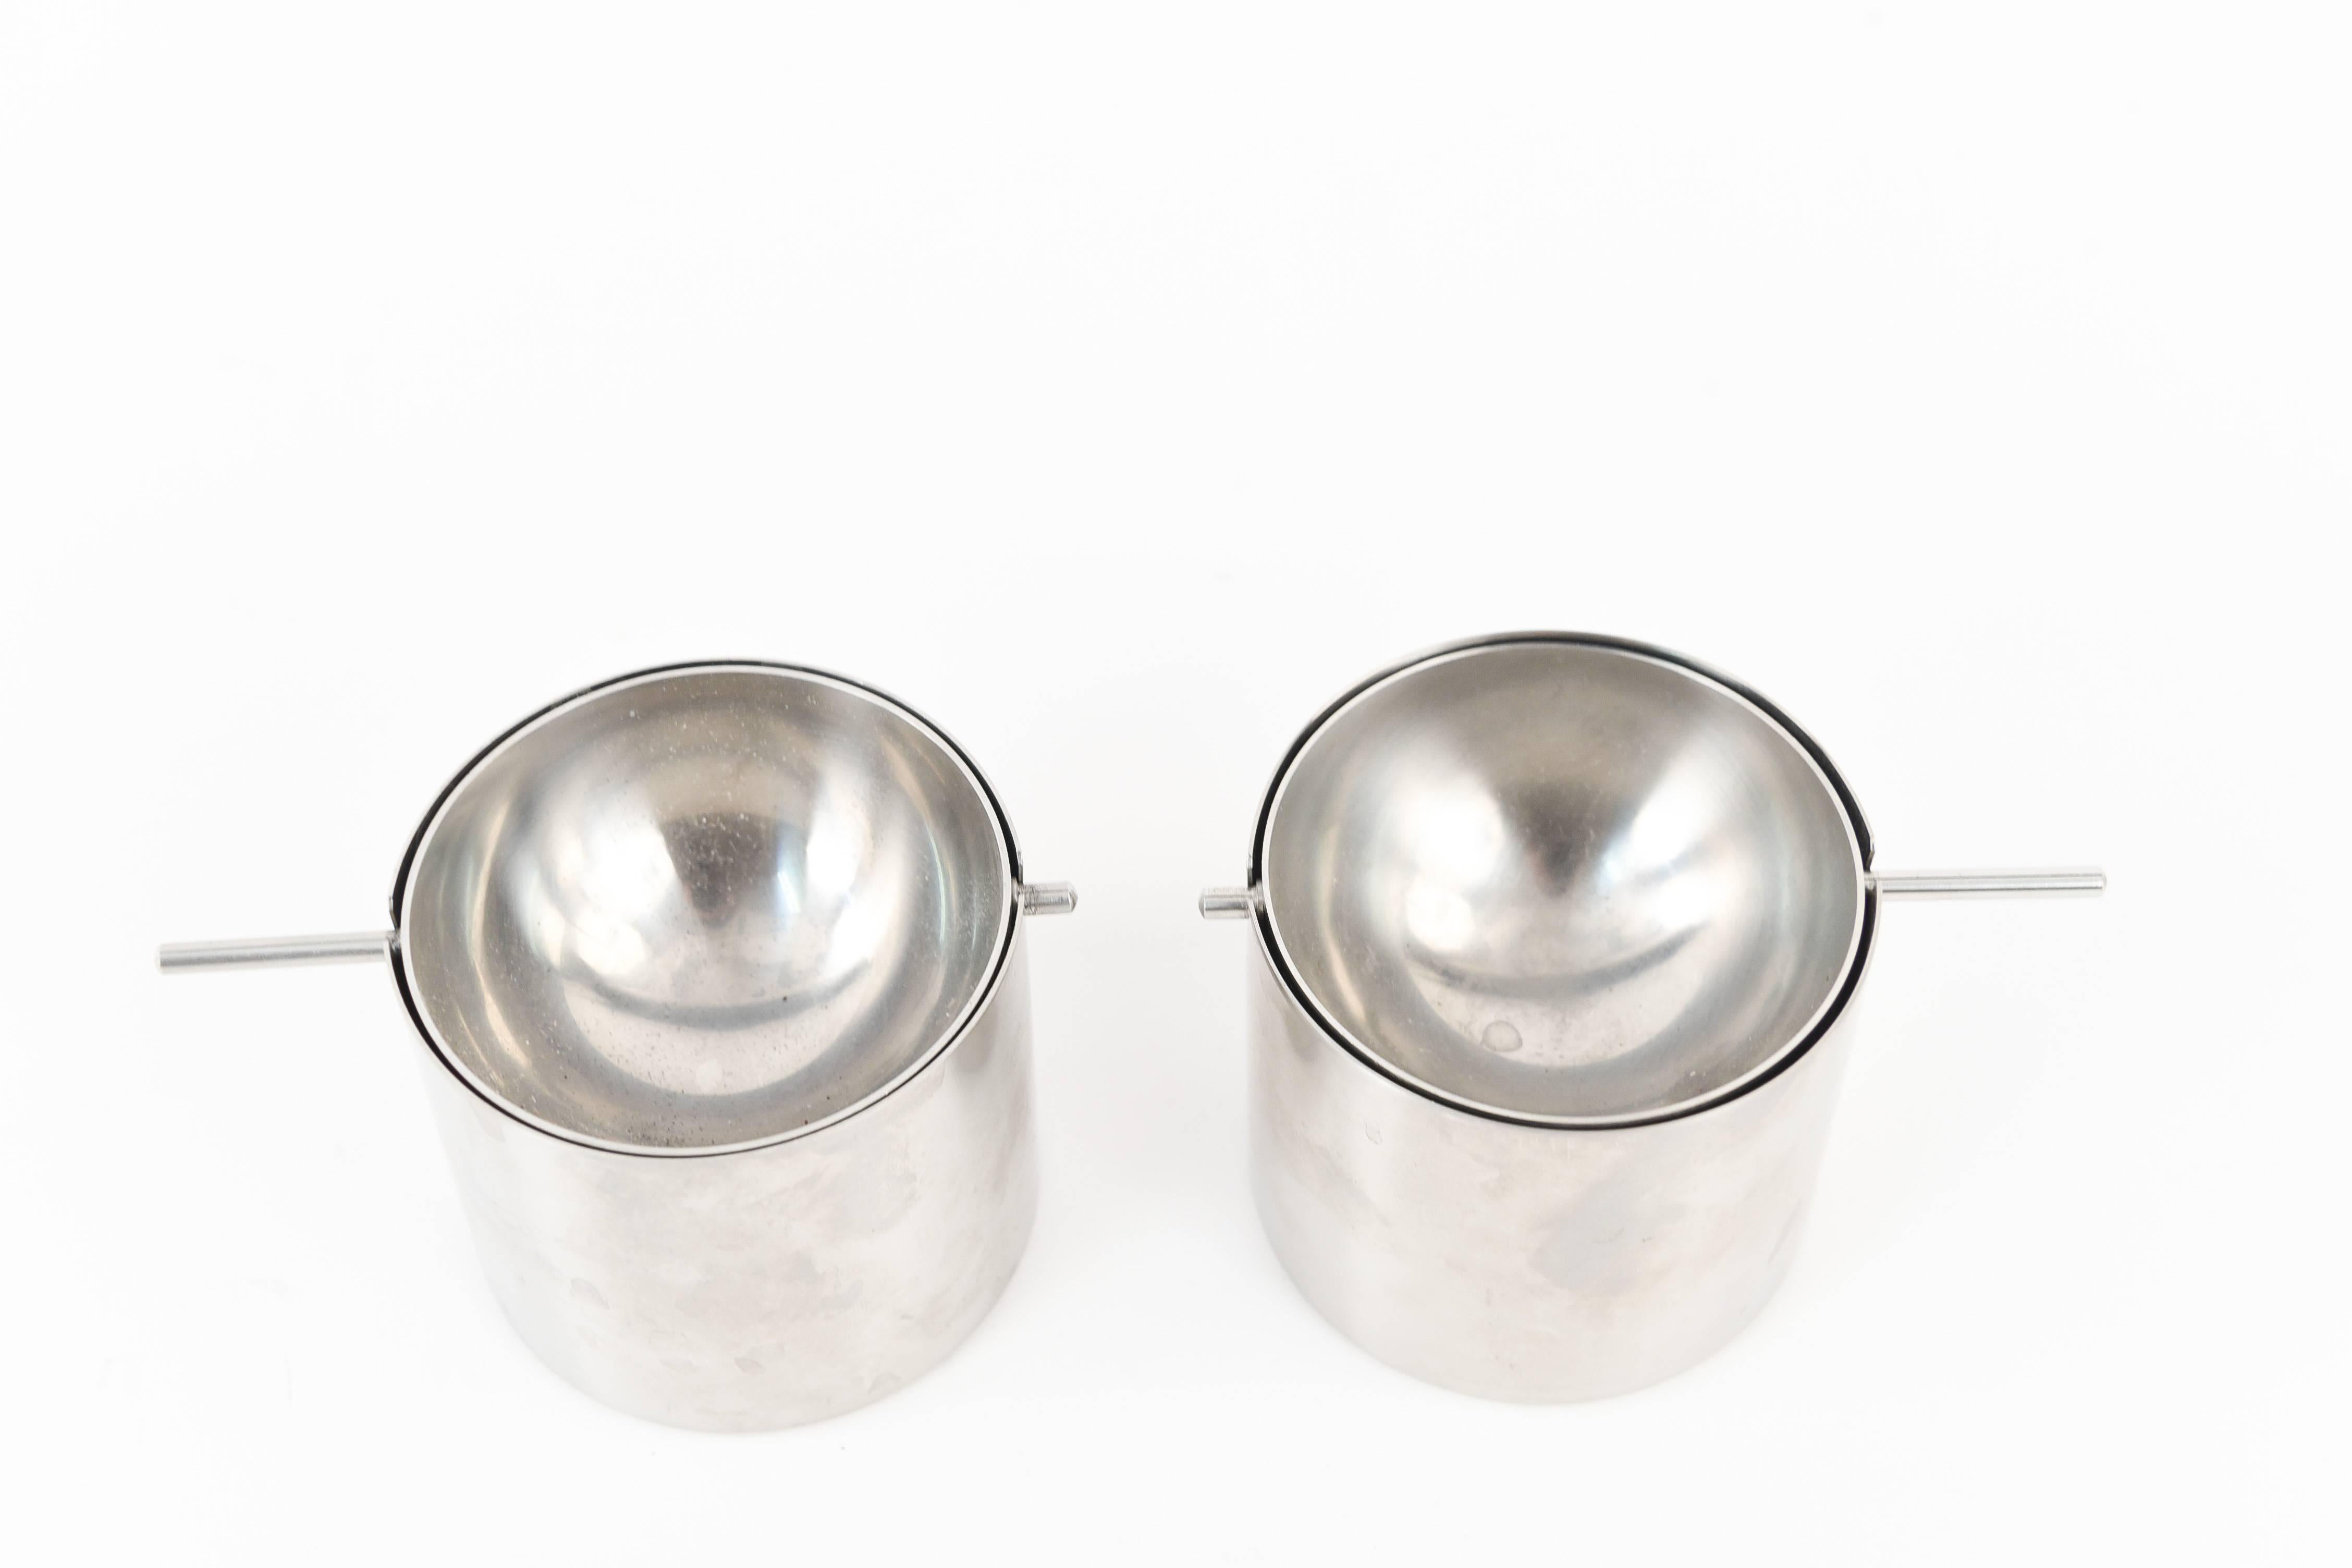 These ashtrays are an iconic form by Danish designer Arne Jacobsen for Stelton. From the Cylinda Line, 1967. They feature a revolving top, with a sleek midcentury chrome look. Two available.